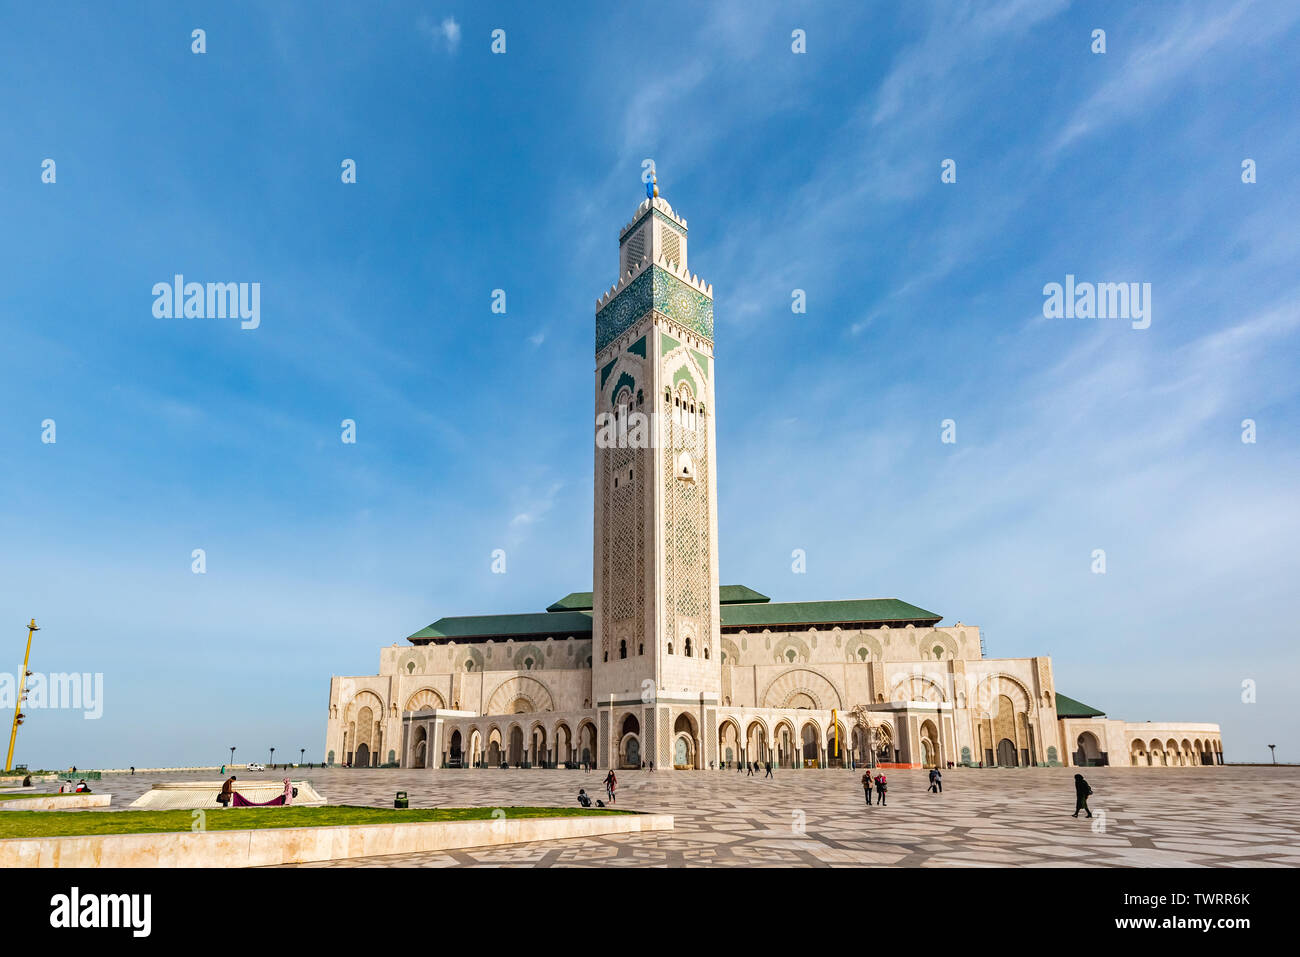 The Hassan II Mosque is a mosque in Casablanca, Morocco. It is the largest mosque in Morocco and the 7th largest in the world. Stock Photo